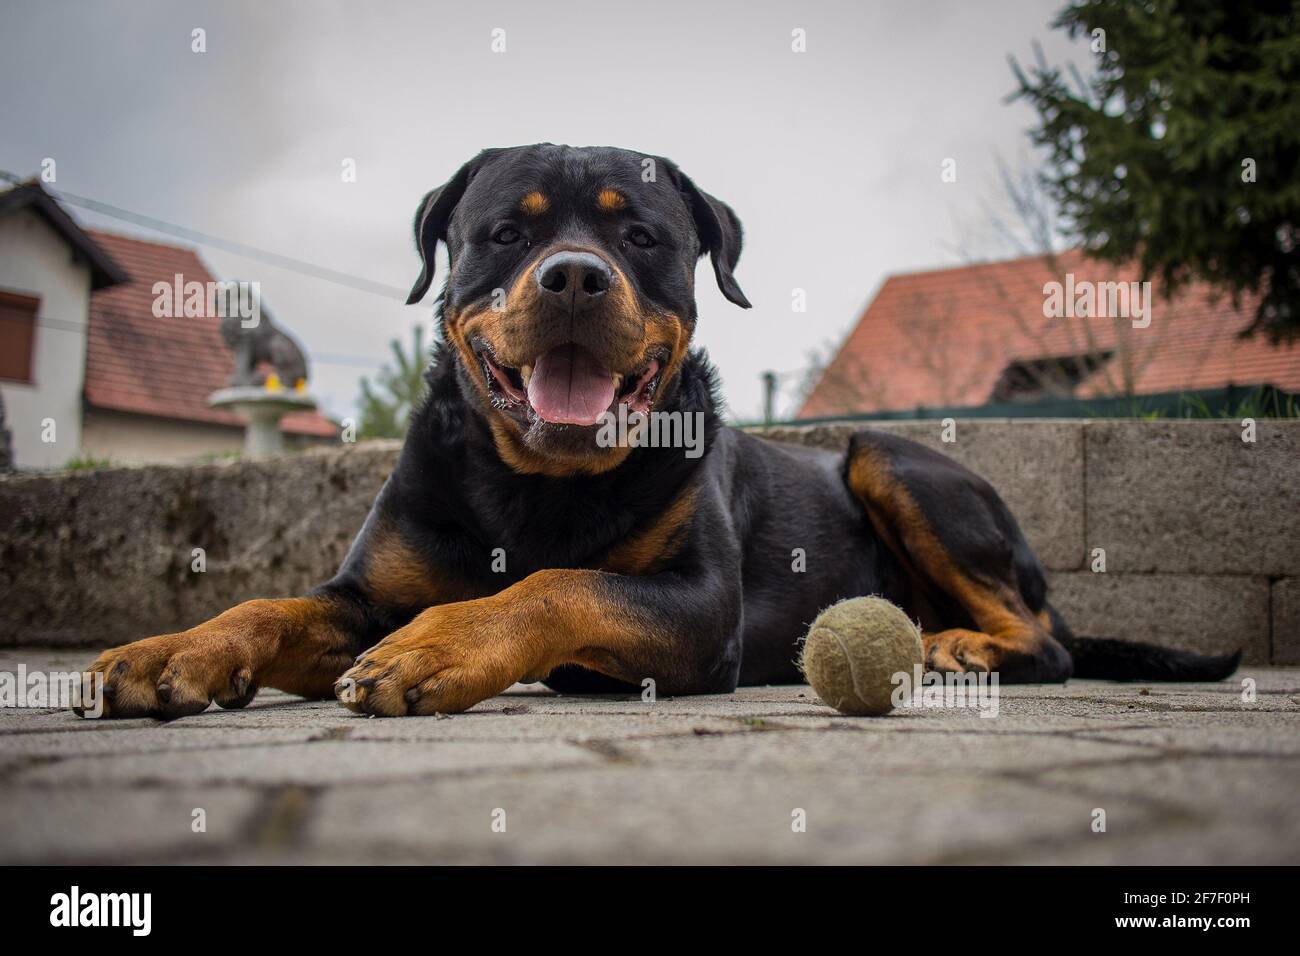 Cute black and brown Rottweiler dog is lying on the tiled concrete floor and looking towards the camera. A tennis ball is lying next to the dog. Stock Photo